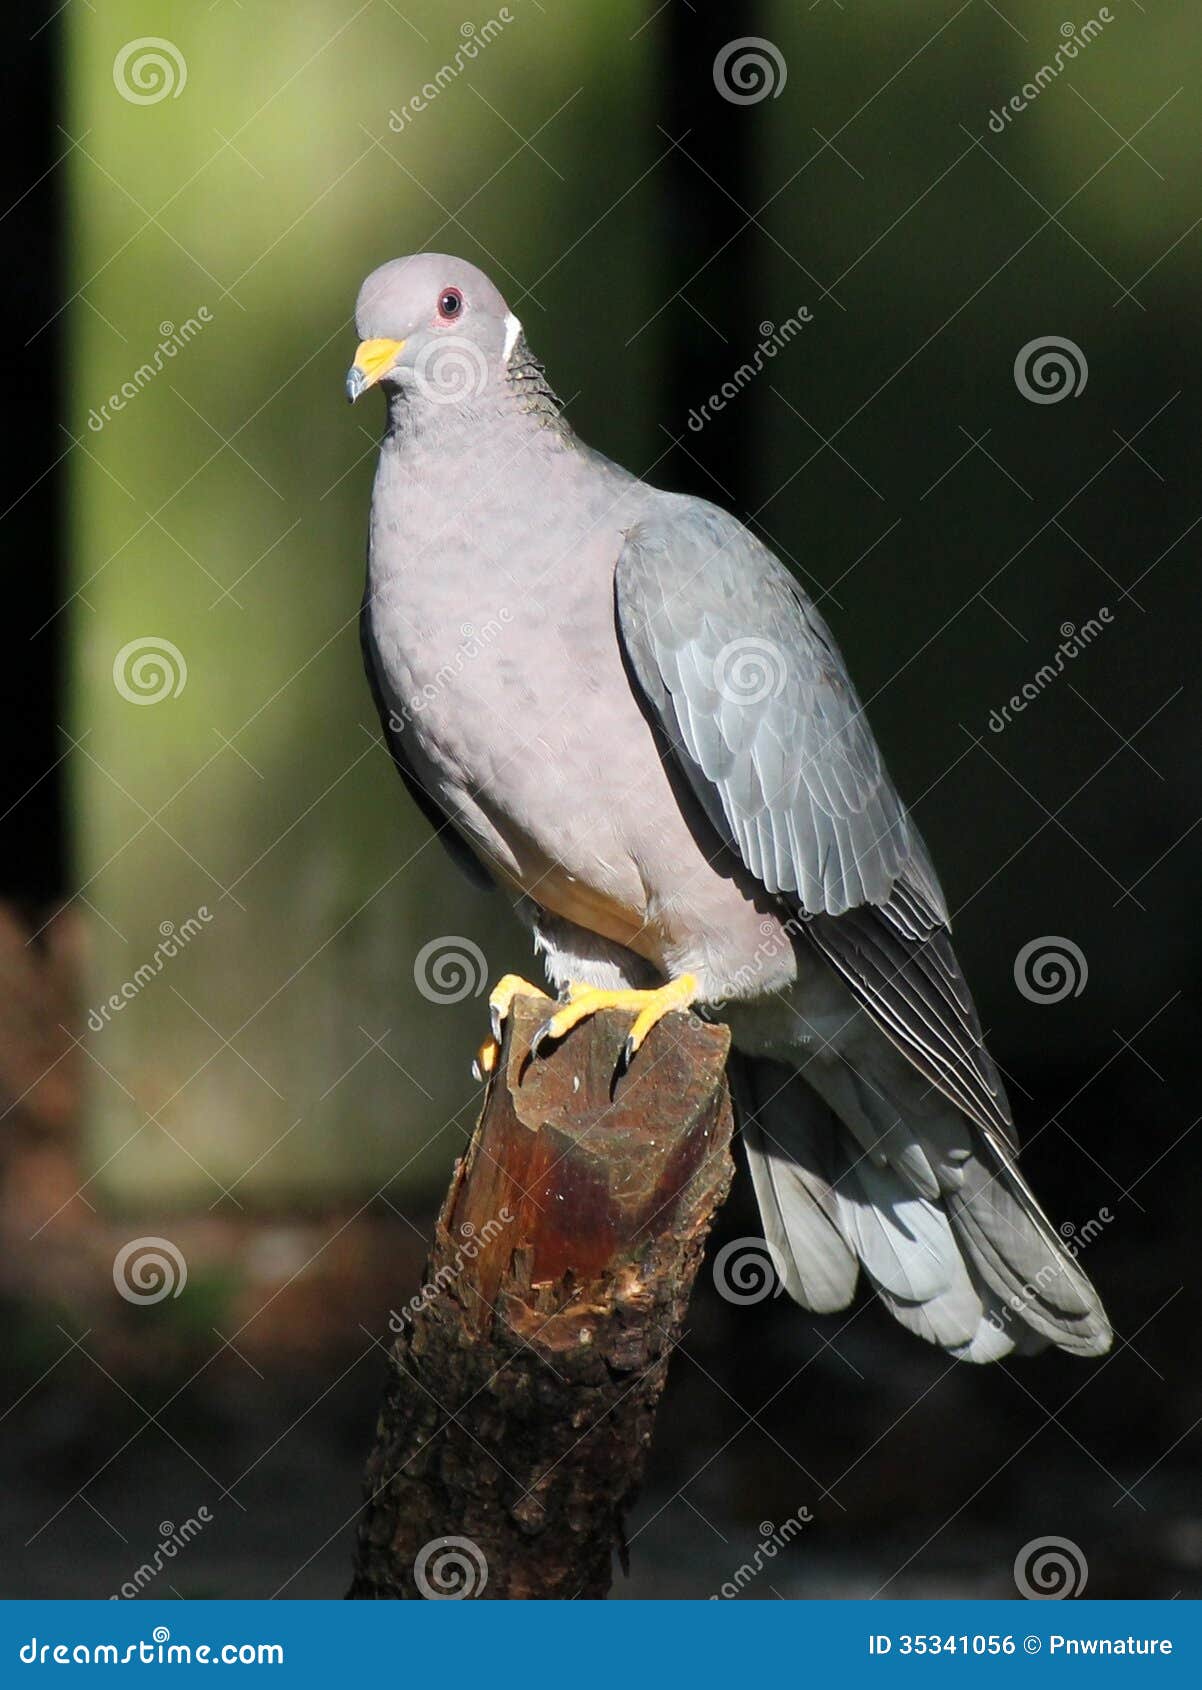 band-tailed pigeon perched